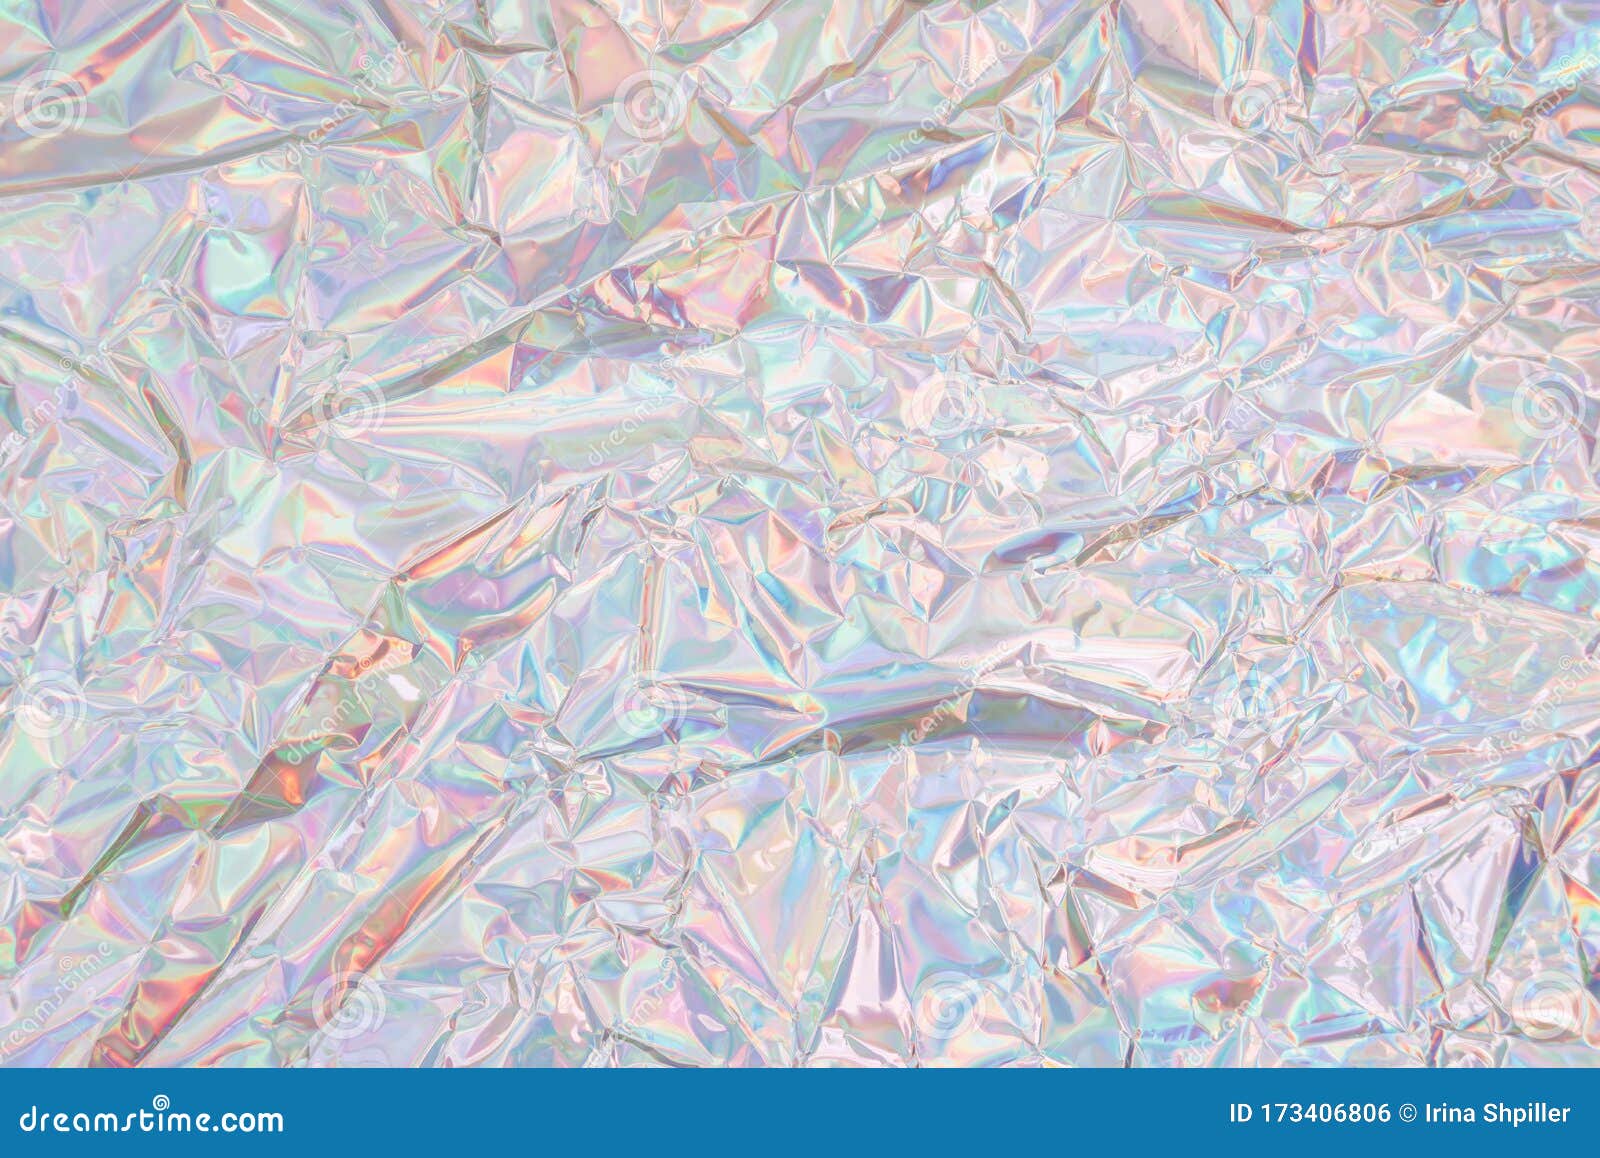 Crumpled Holographic Wrapping Paper with Shiny Effect. Close Up